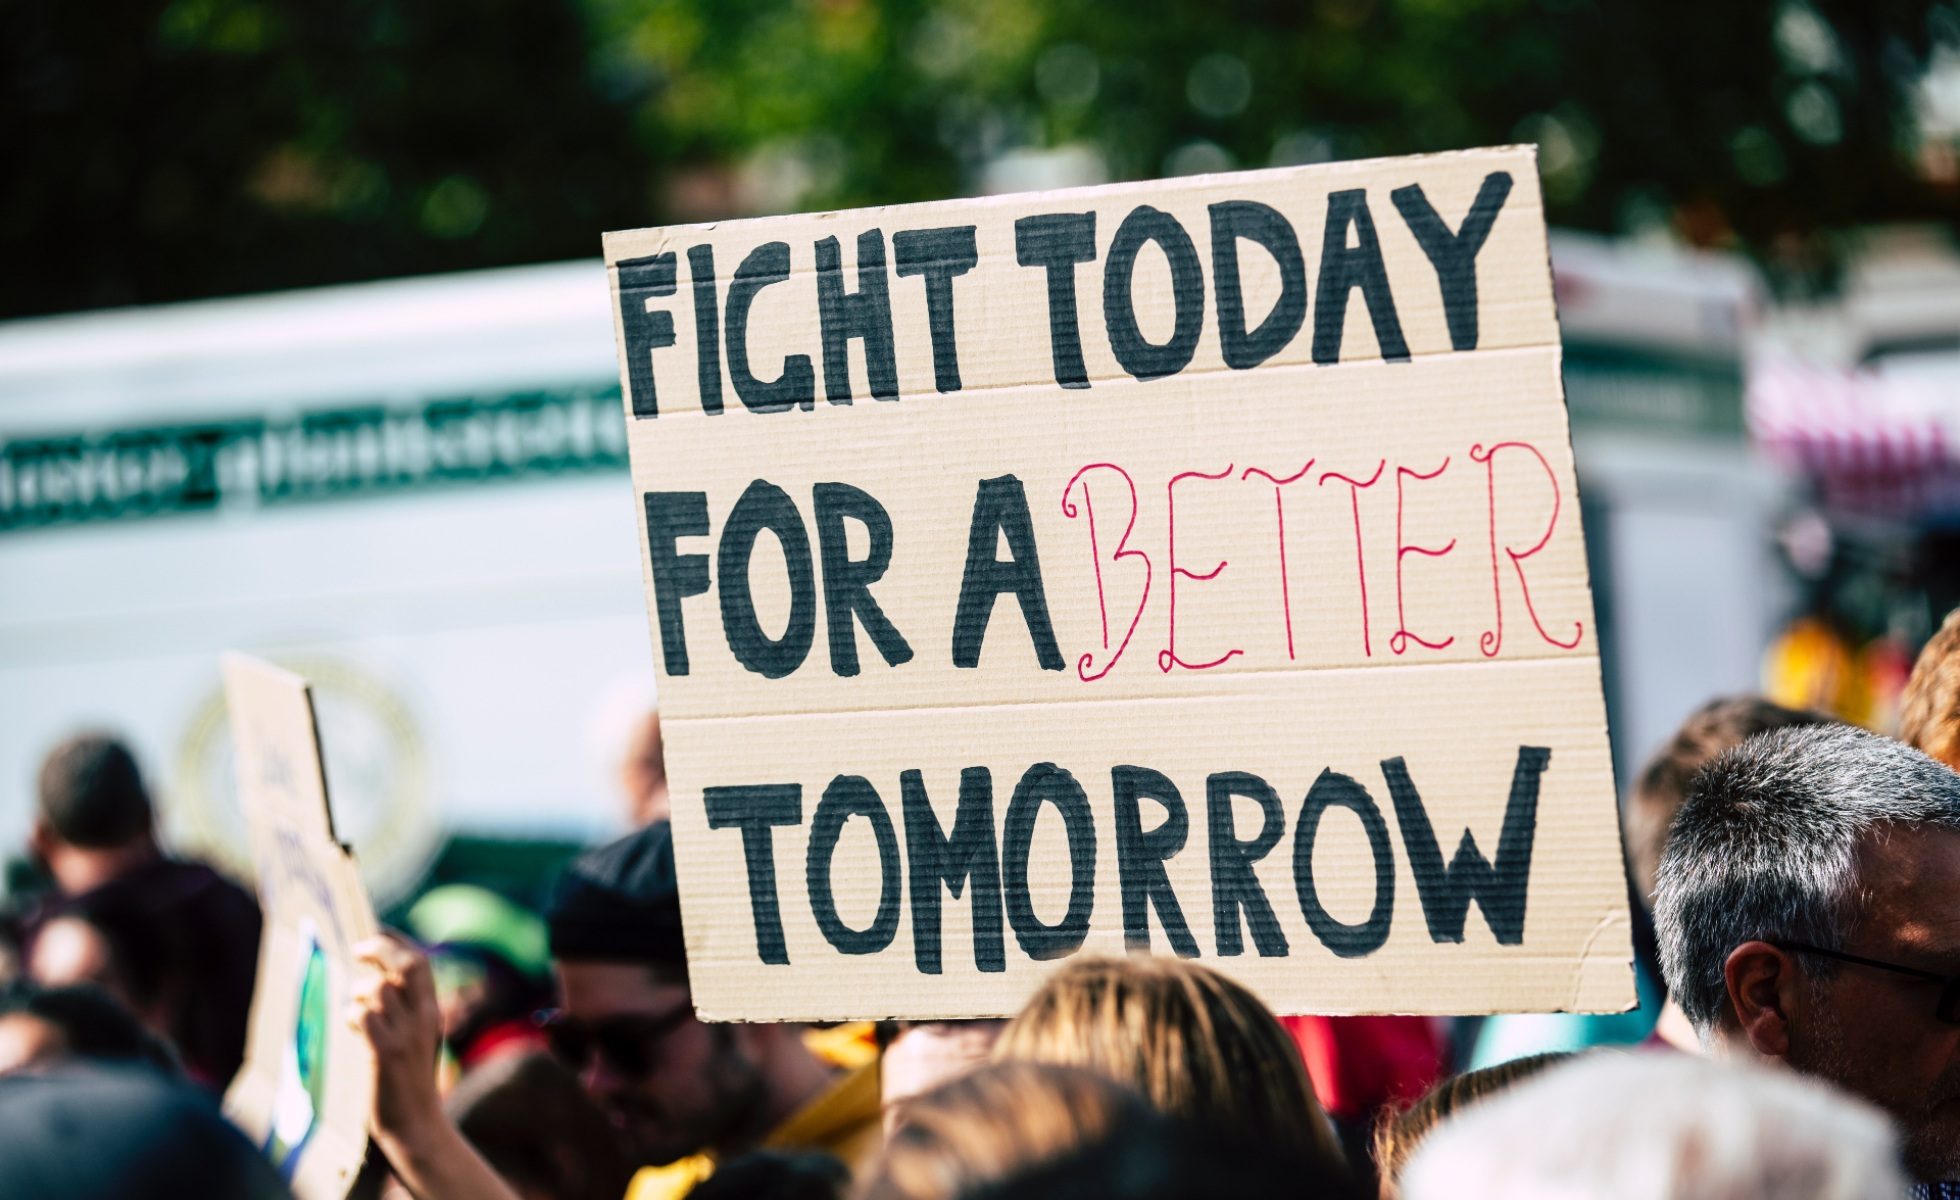 Close up of cardboard sign that says "Fight for a better tomorrow"